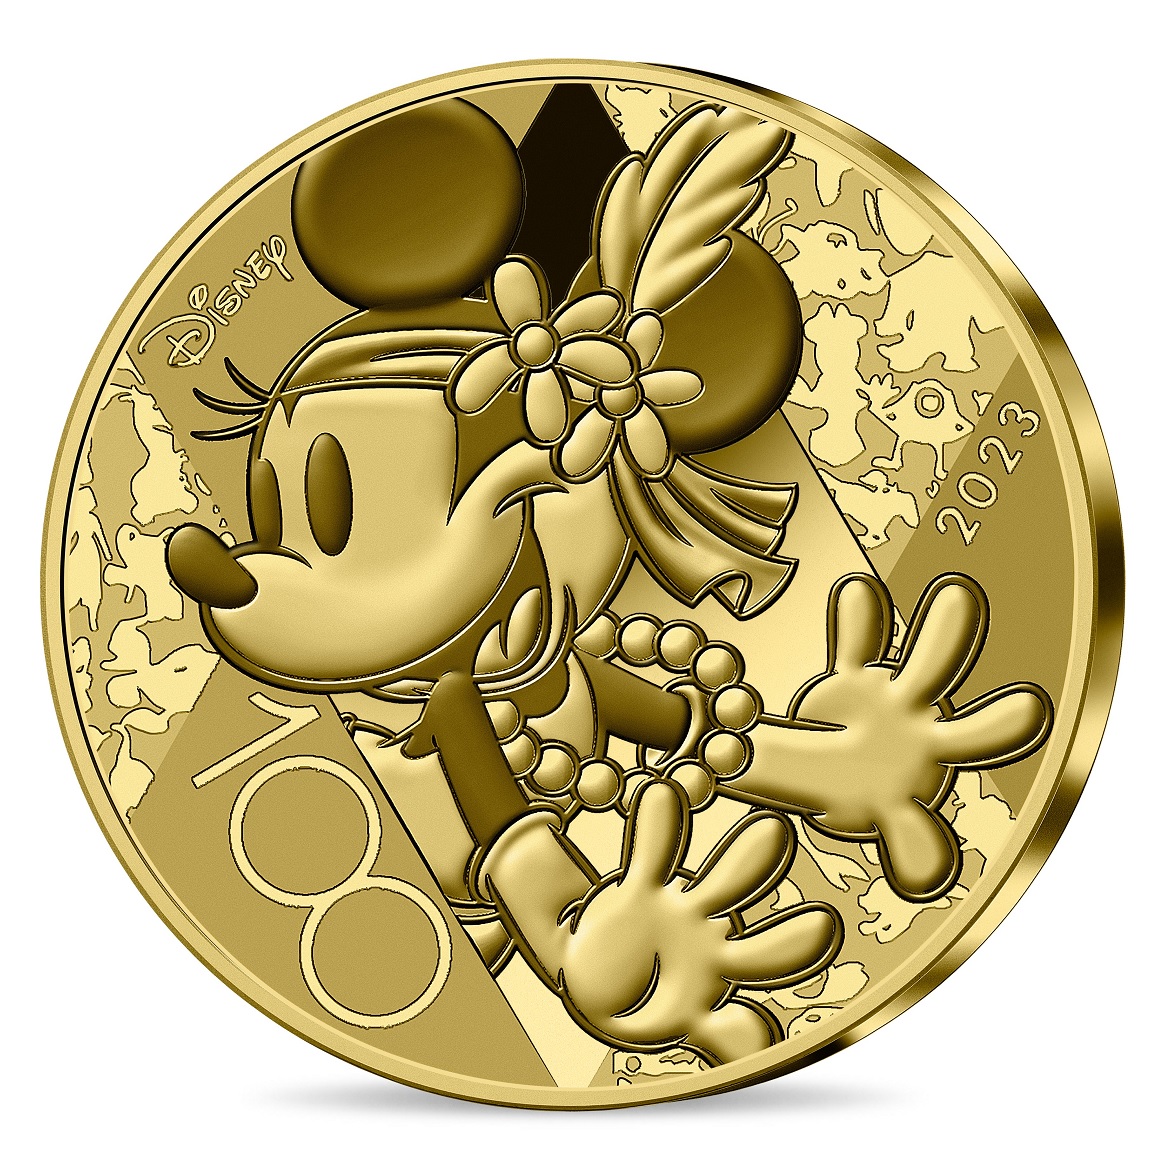 (EUR07.Proof.2023.10041378020000) 5 euro France 2023 Proof gold - Disney Studios 100 Years (Minnie Mouse) Obverse (zoom)